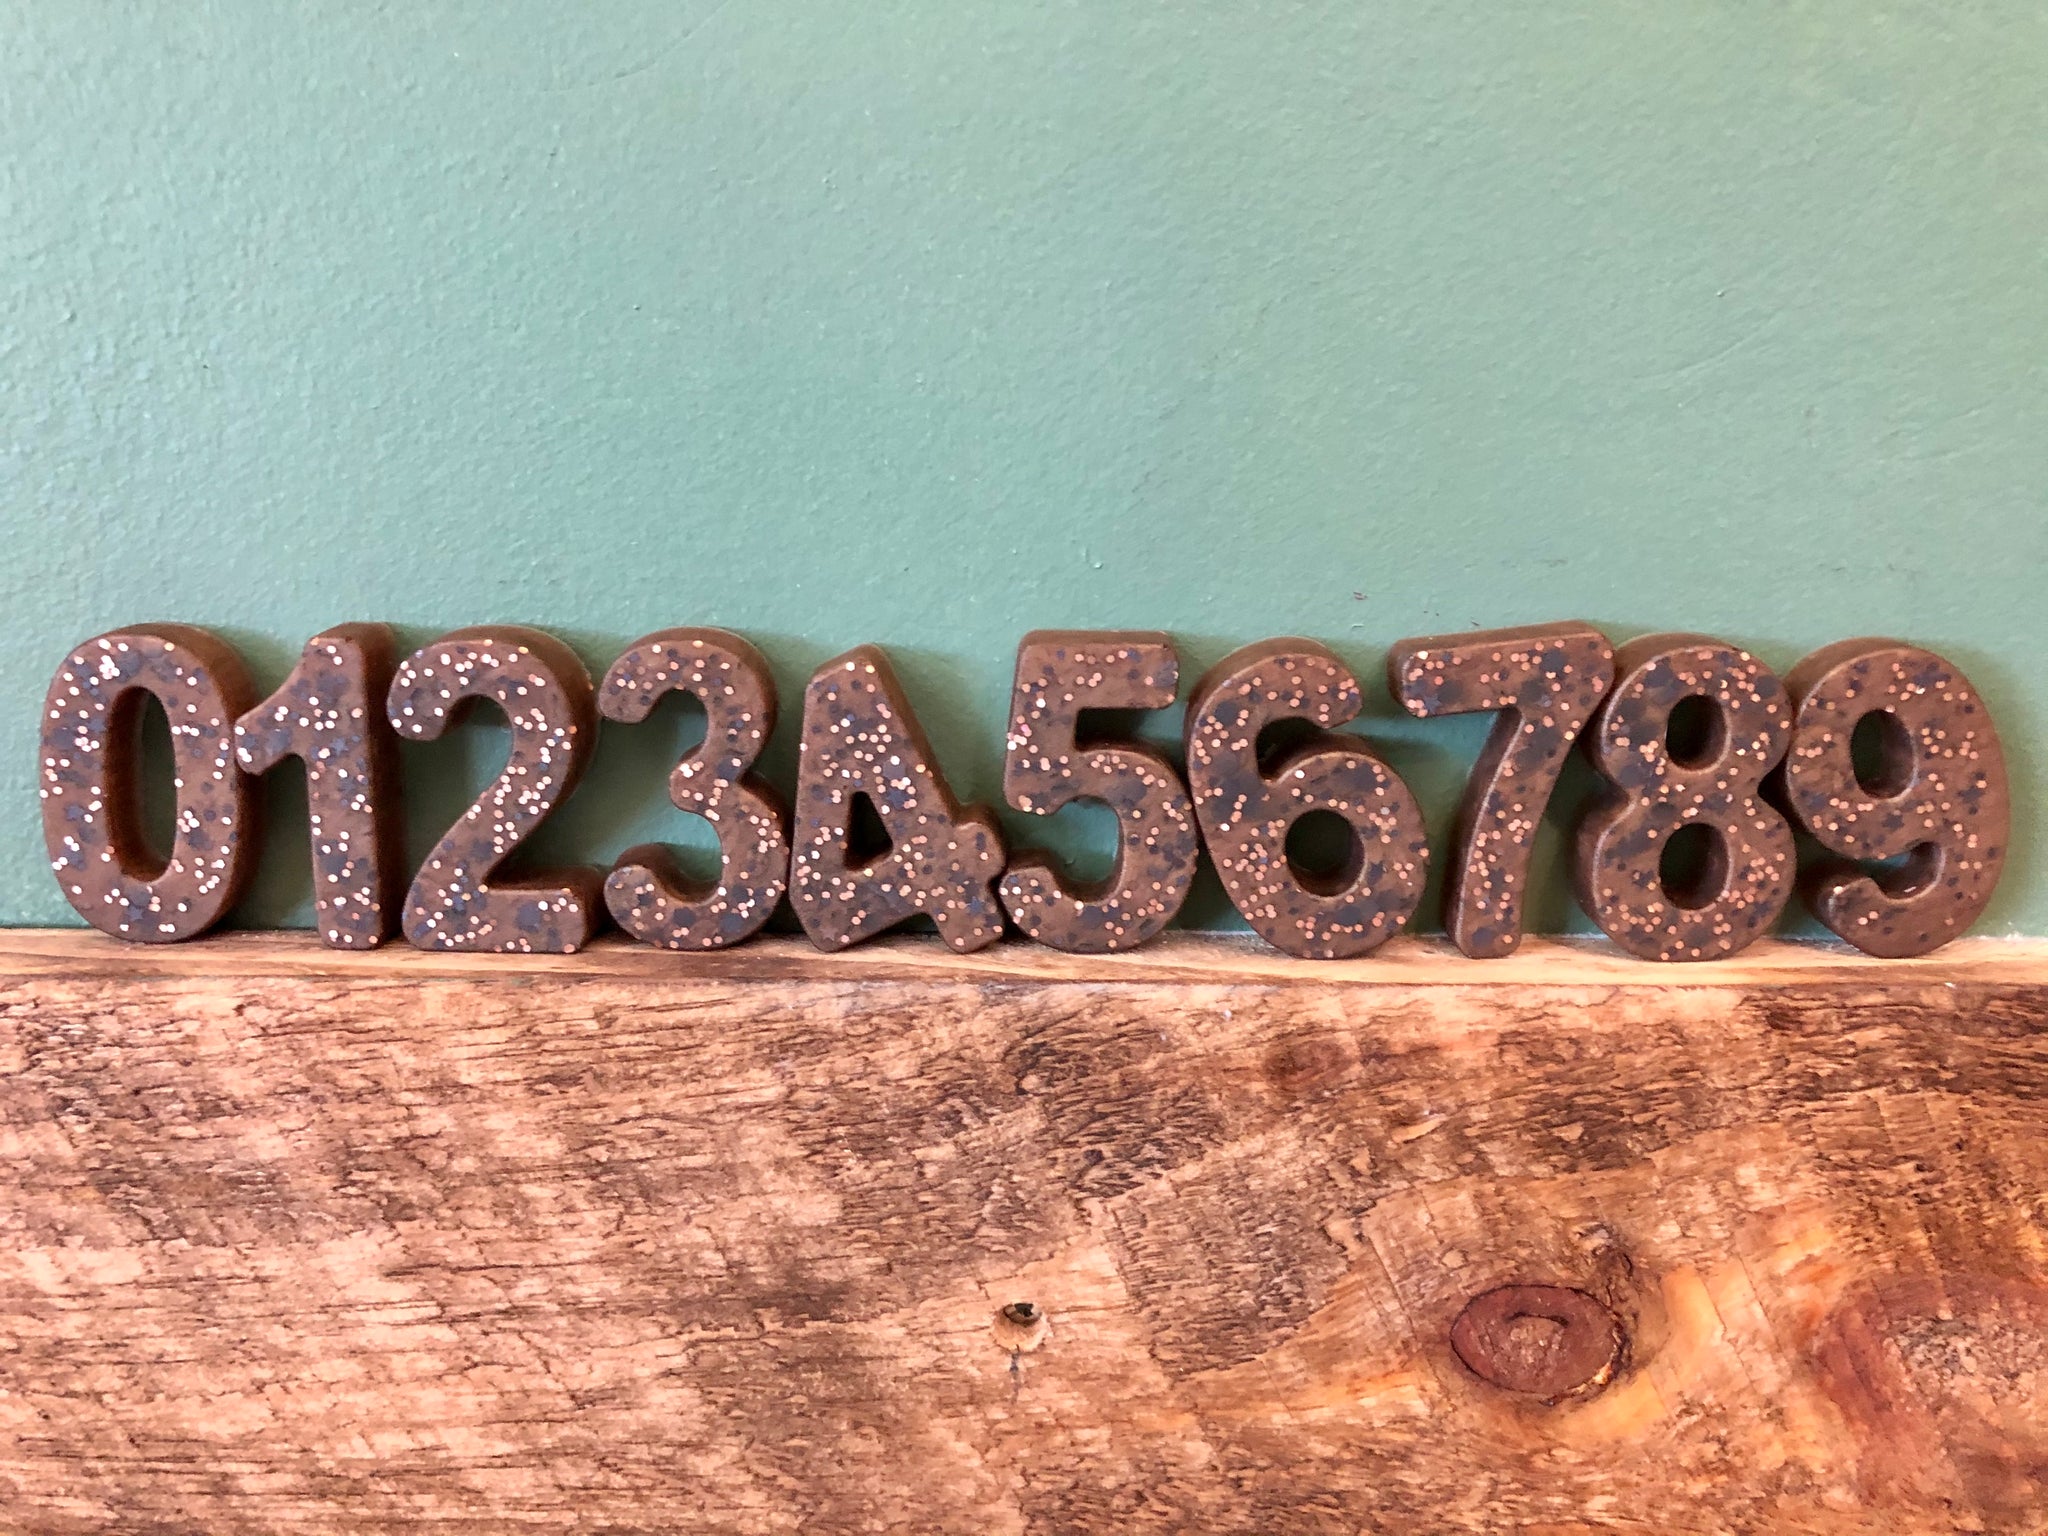 self 0-9 numbers numbers sets (2/3/4inch) strong for houses number